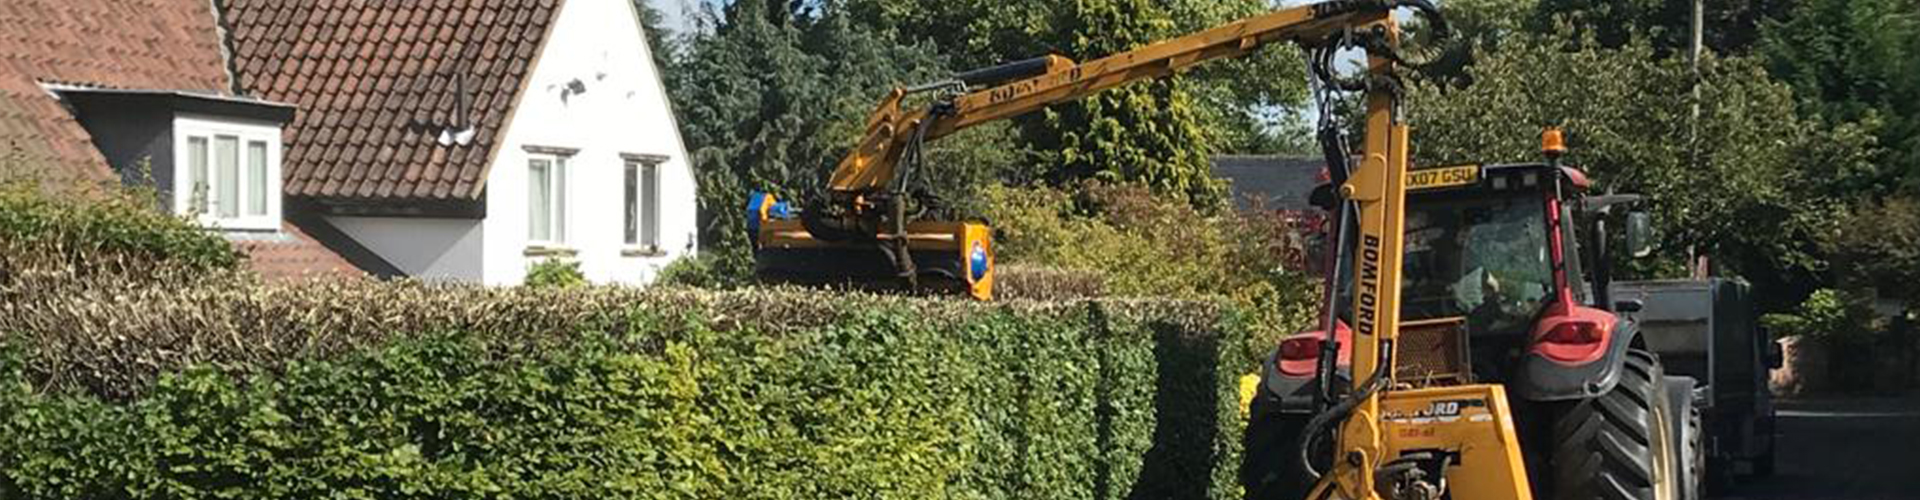 hedge cutting leeds, harrogate wetherby, tadcaster